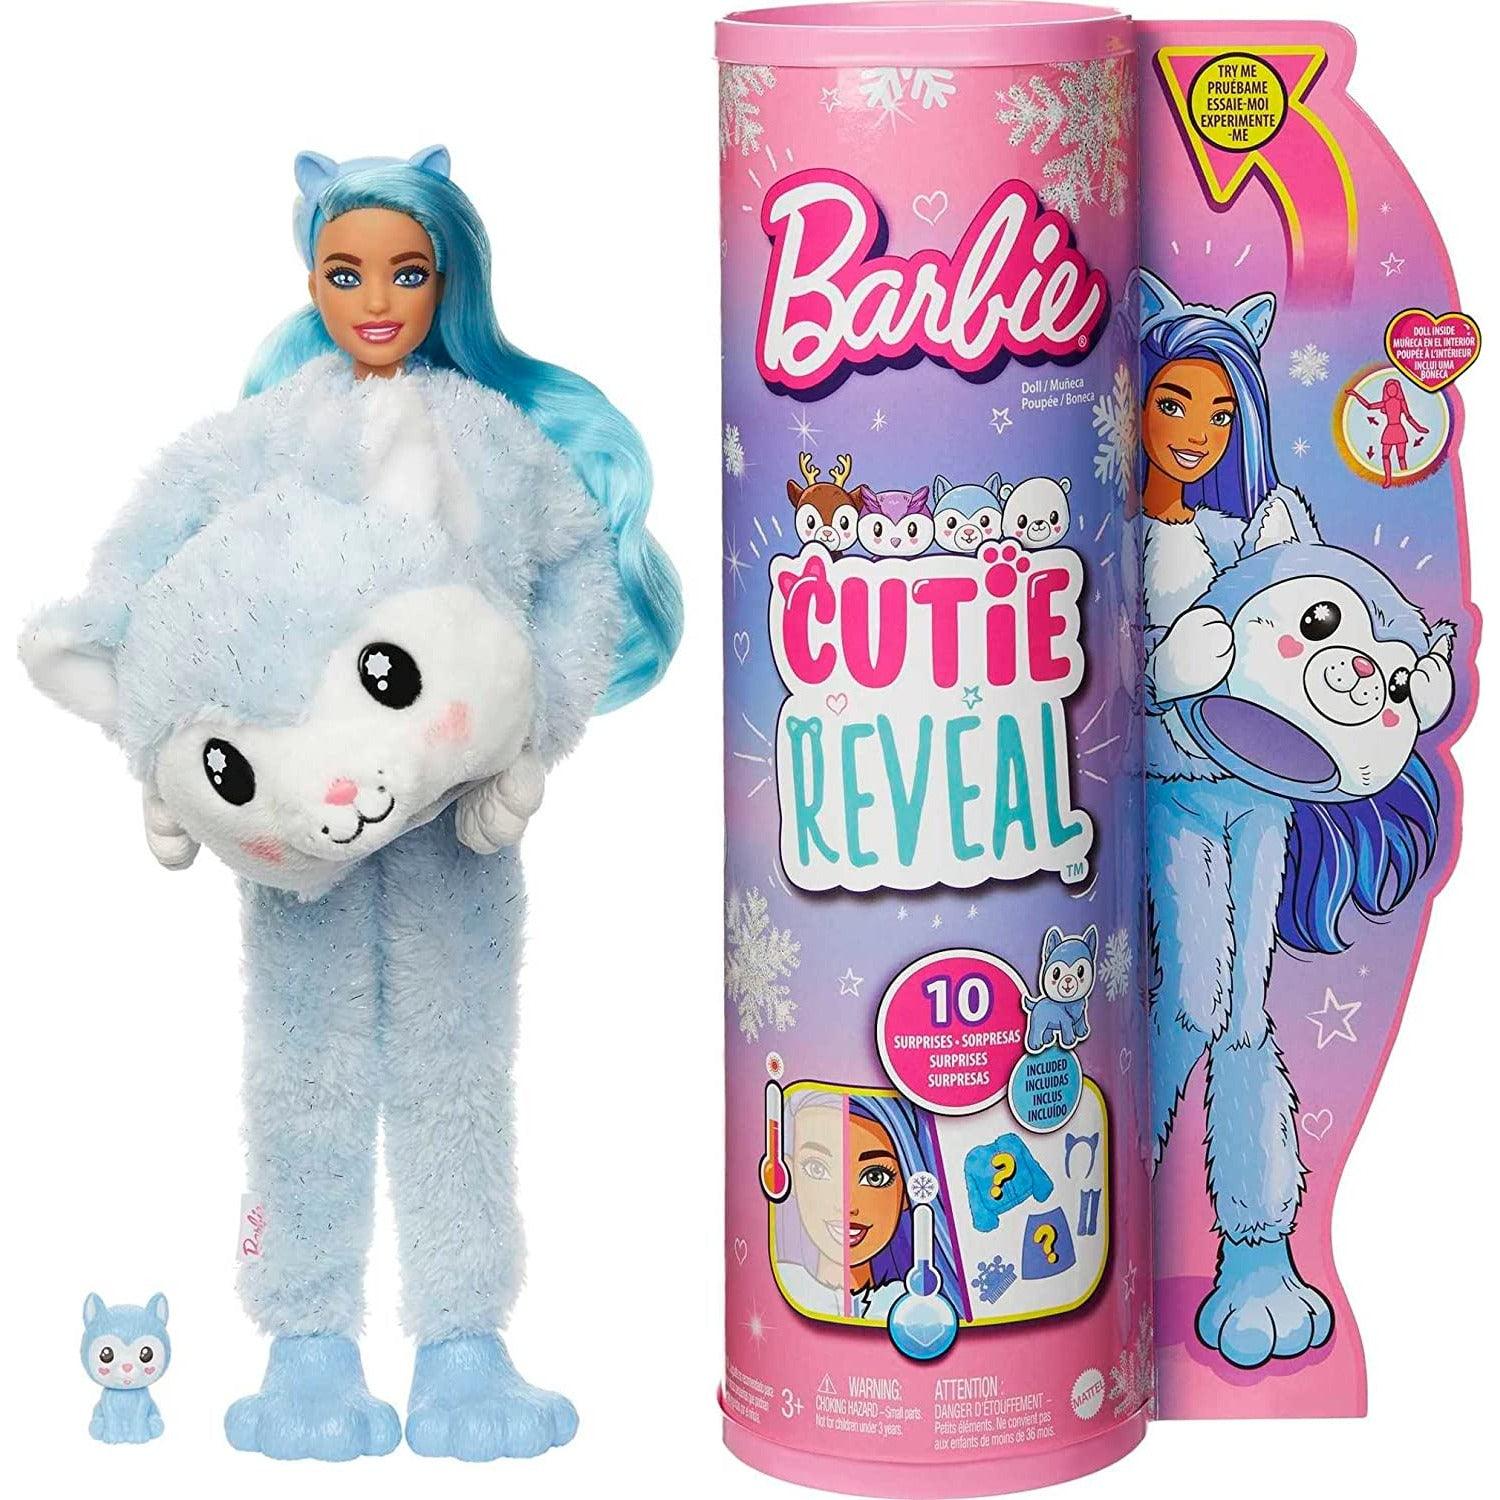 Barbie Doll, Cutie Reveal Husky Plush Costume Doll with 10 Surprises, Mini Pet, Color Change and Accessories, Snowflake Sparkle - BumbleToys - 5-7 Years, Barbie, Fashion Dolls & Accessories, Girls, OXE, Pre-Order